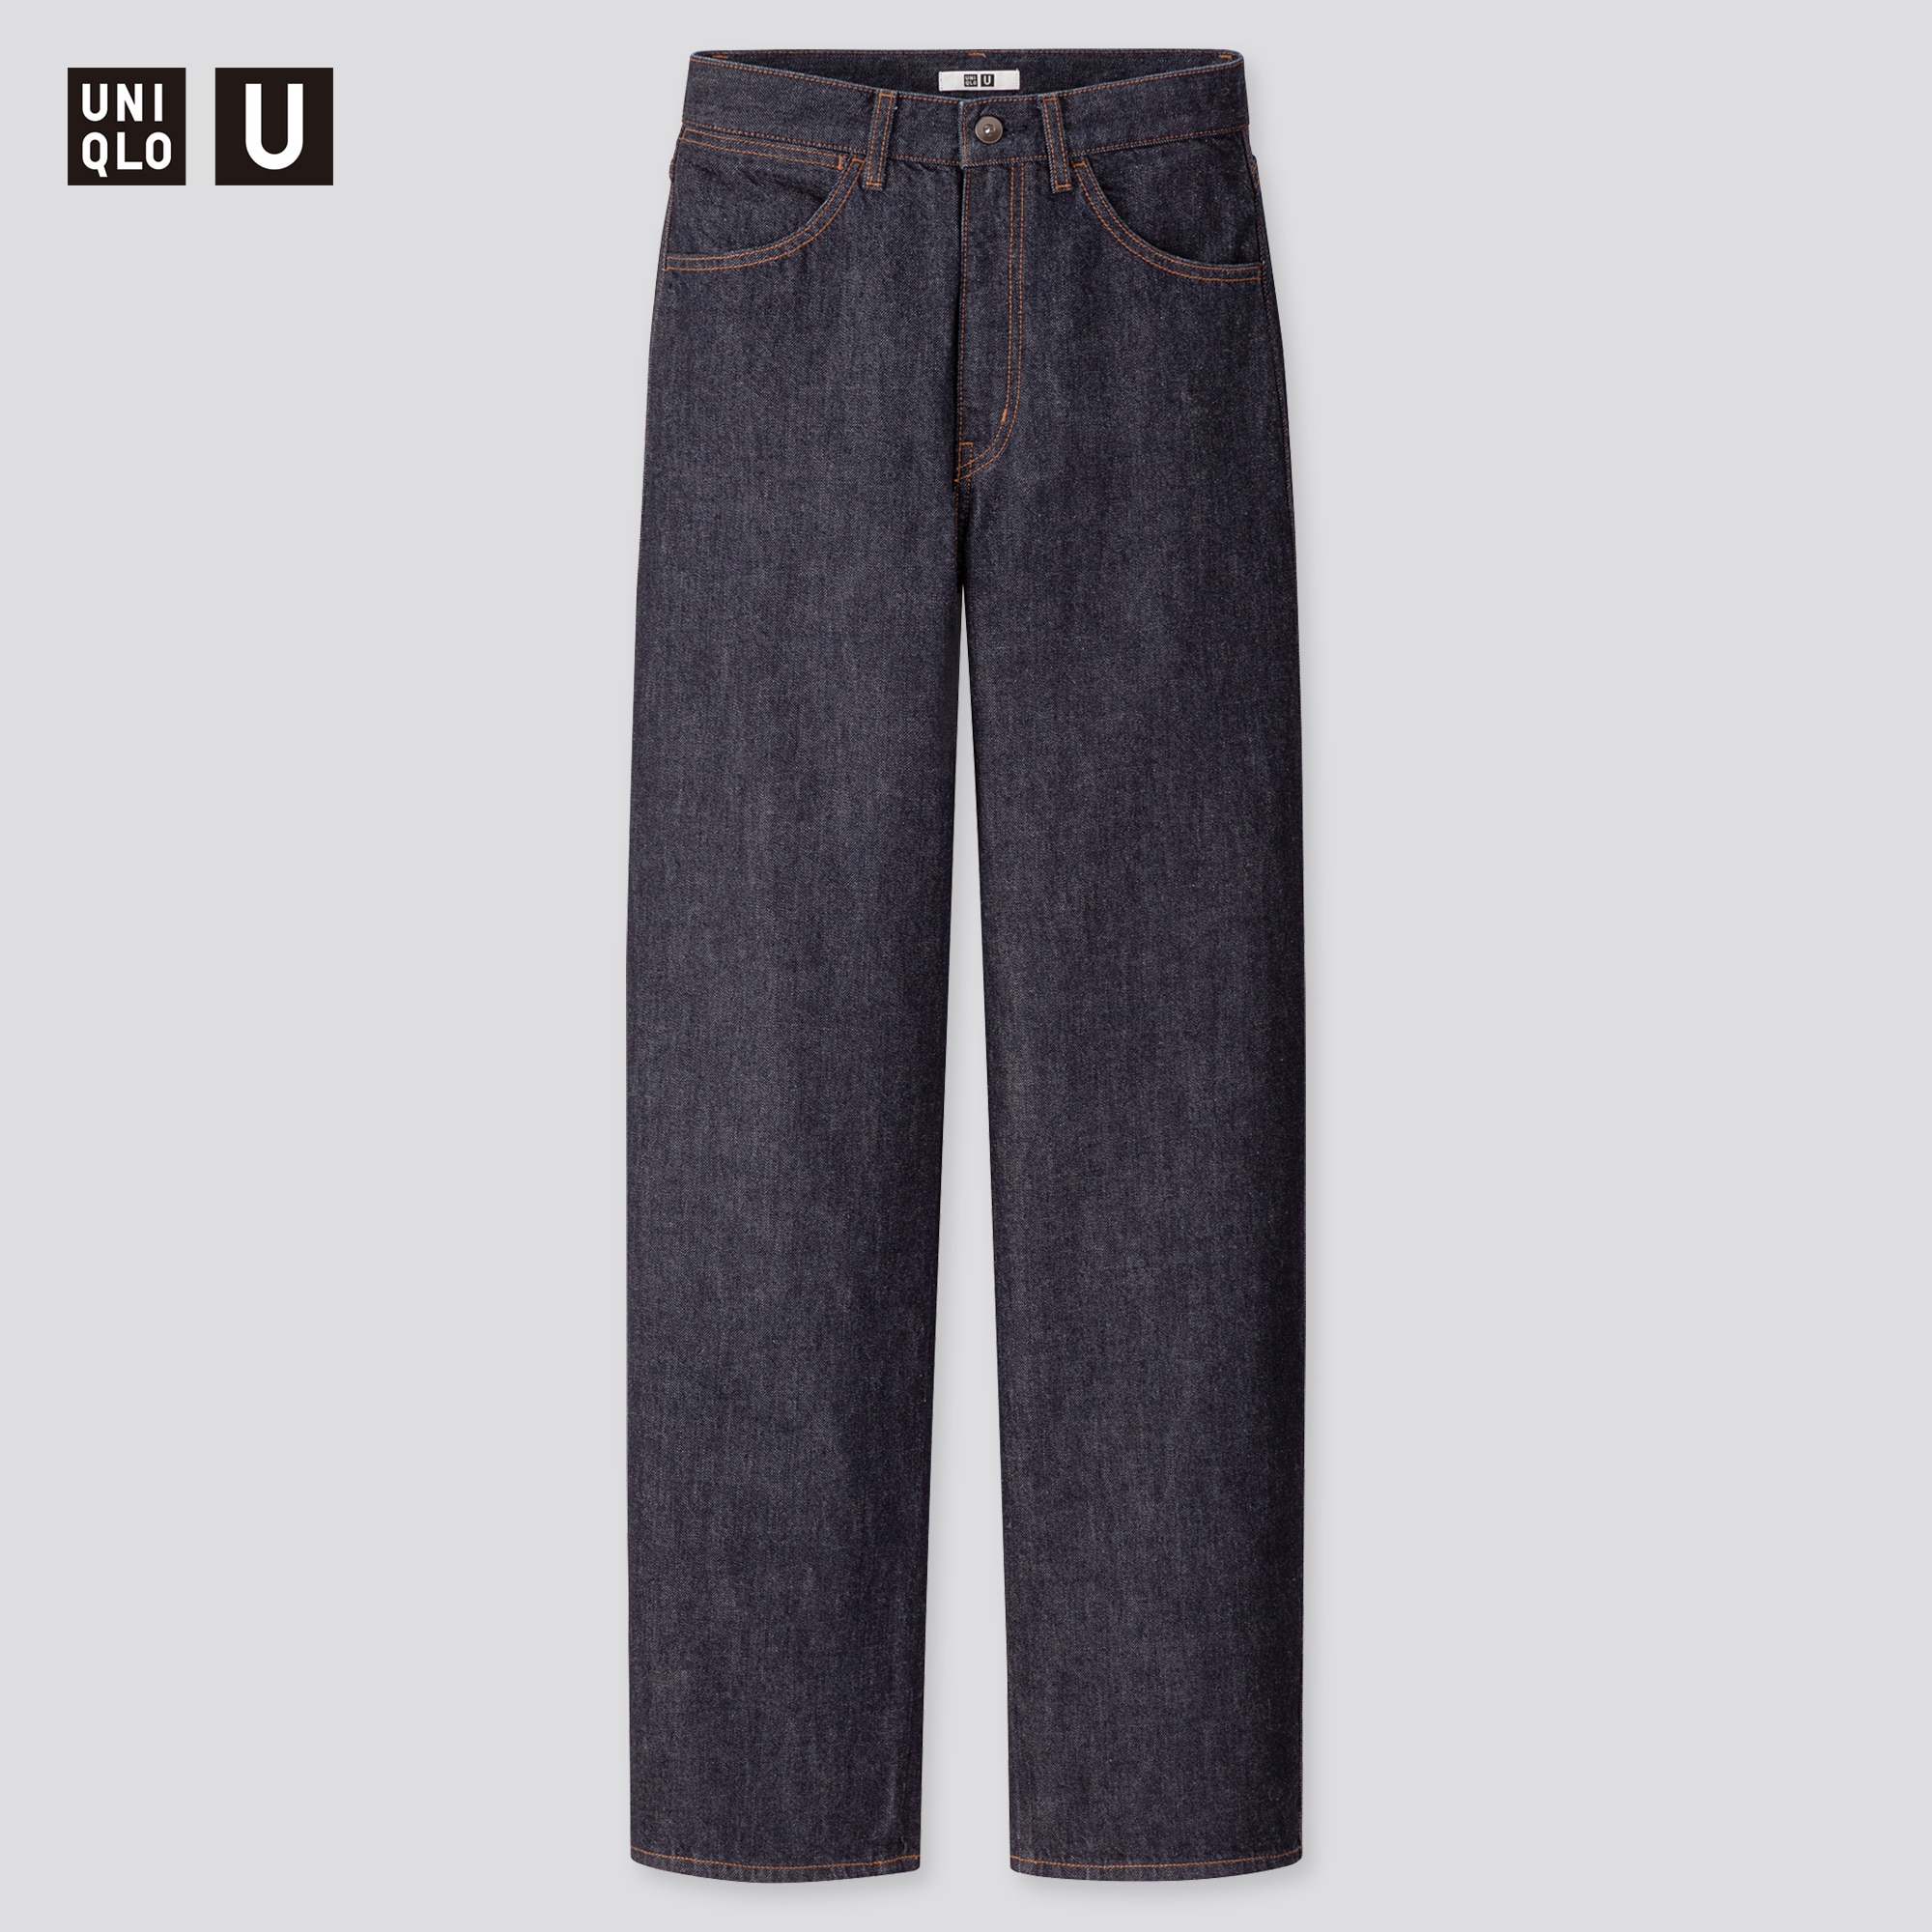 uniqlo curved jeans